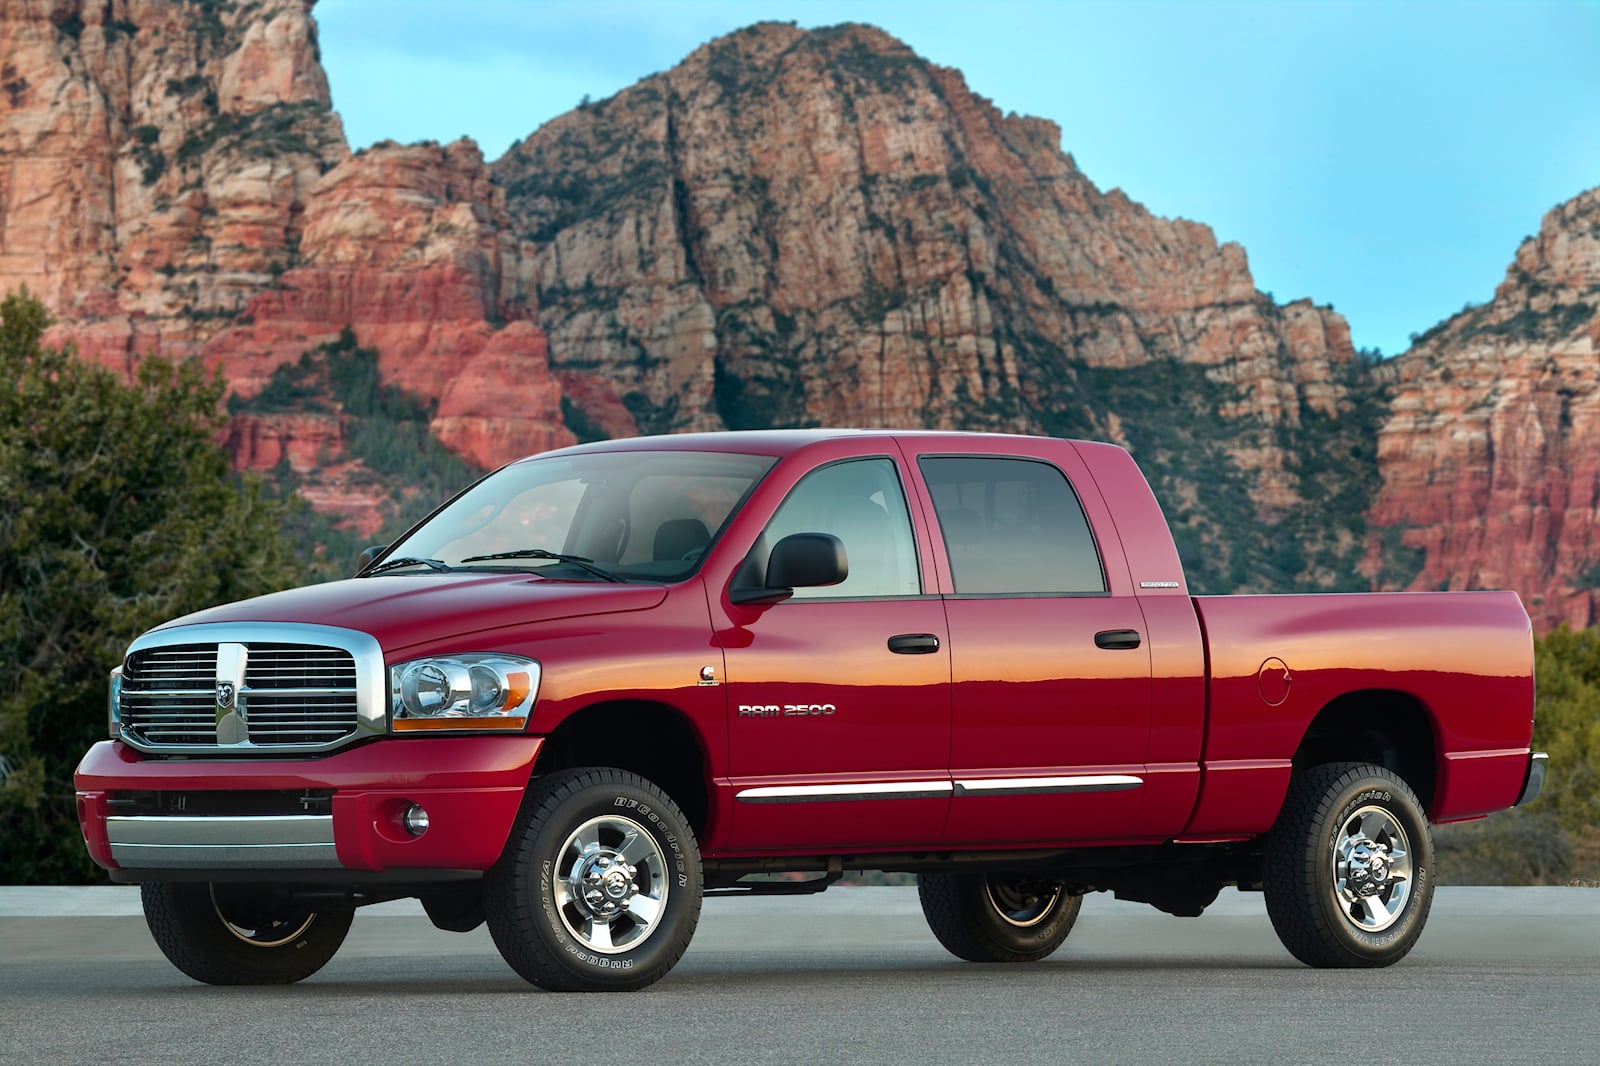 2009 Dodge Ram 2500 Front Angle View